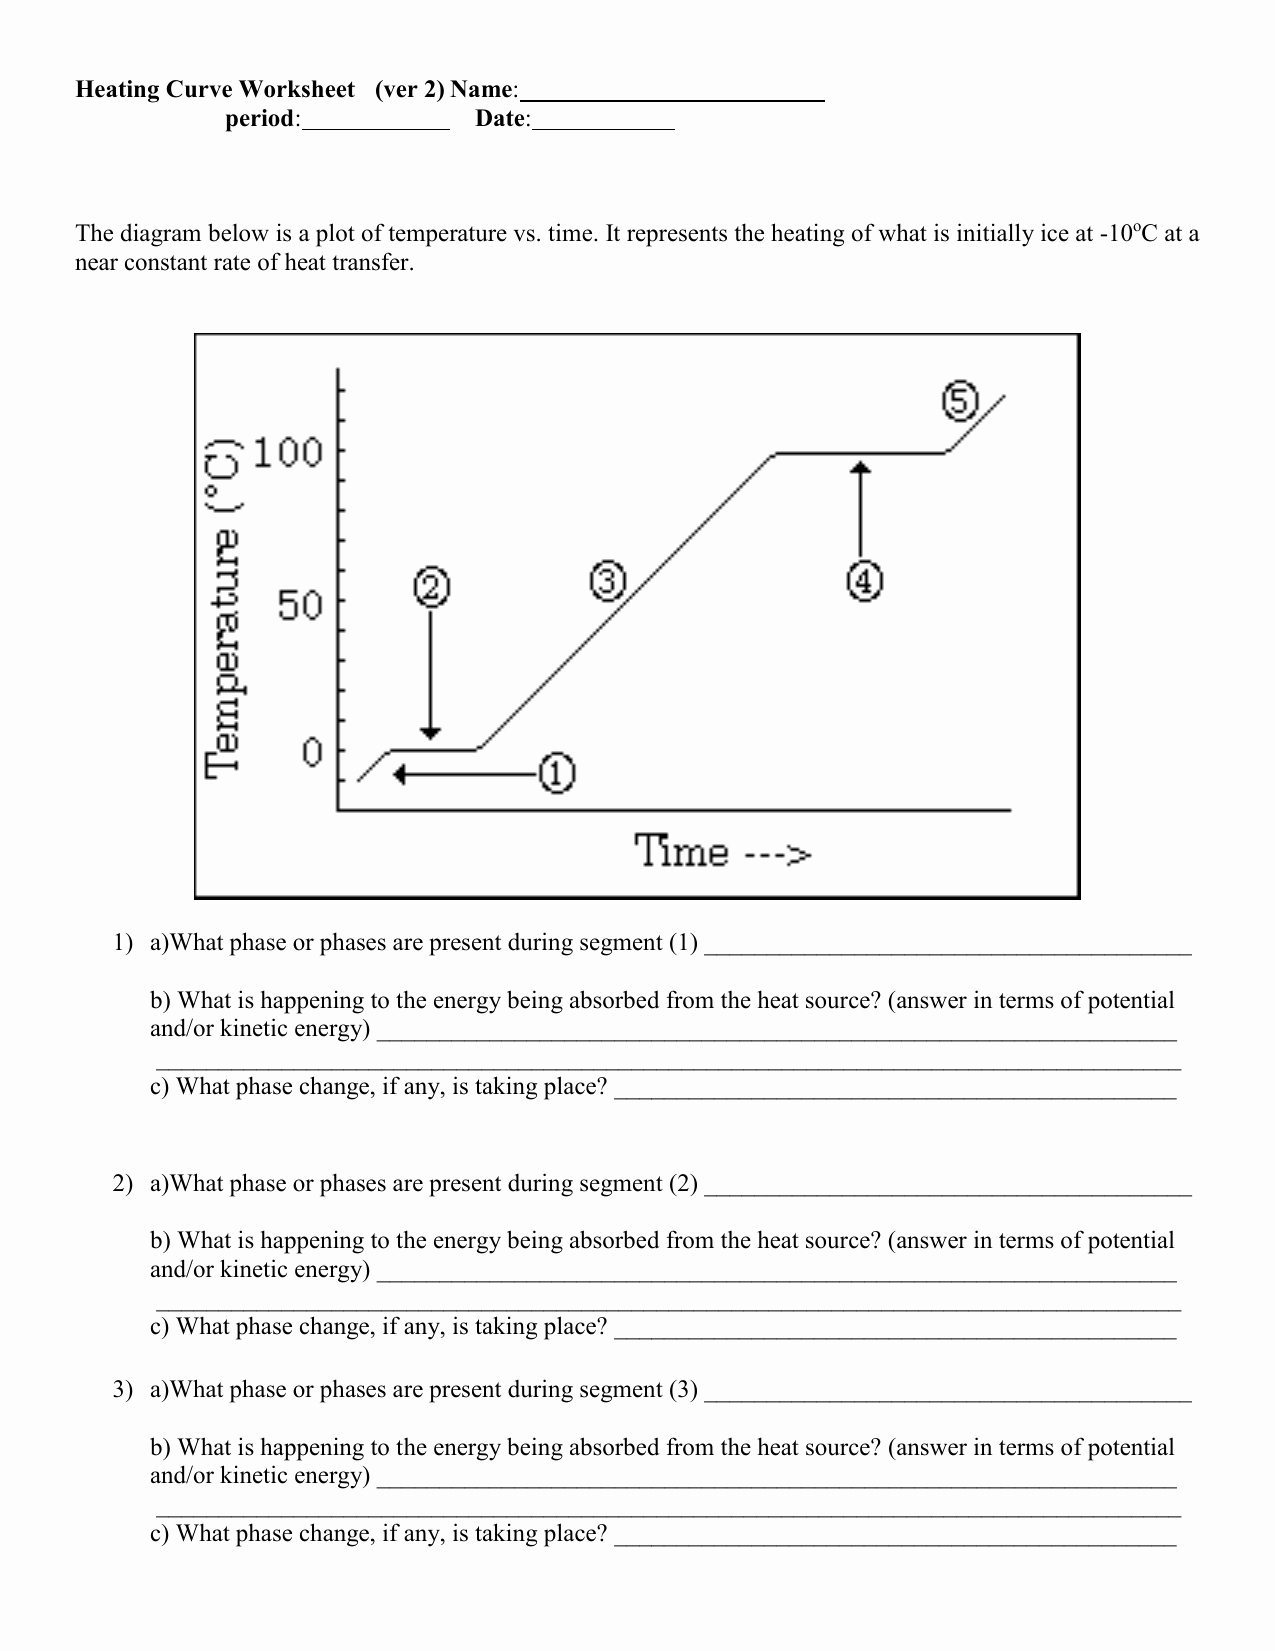 Heating and Cooling Curve Worksheet Lovely Heating Curve Worksheet